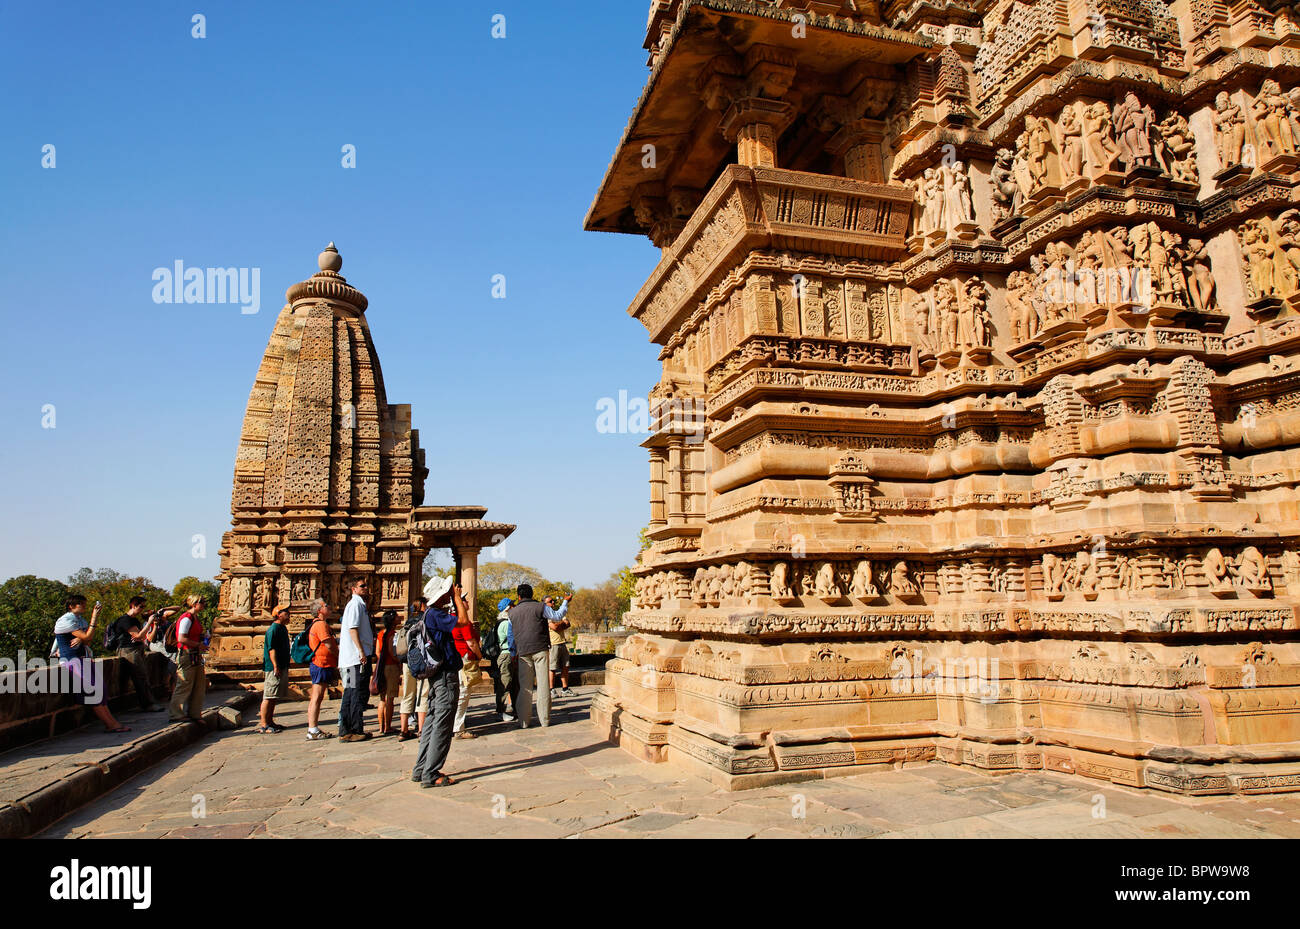 CdHBH 10x8ft Lakshmana Temple in India Backdrop World Famous Scenery Photography Background Indoor Decors Wallpaper Ancient Building Backdrop Photo Studio